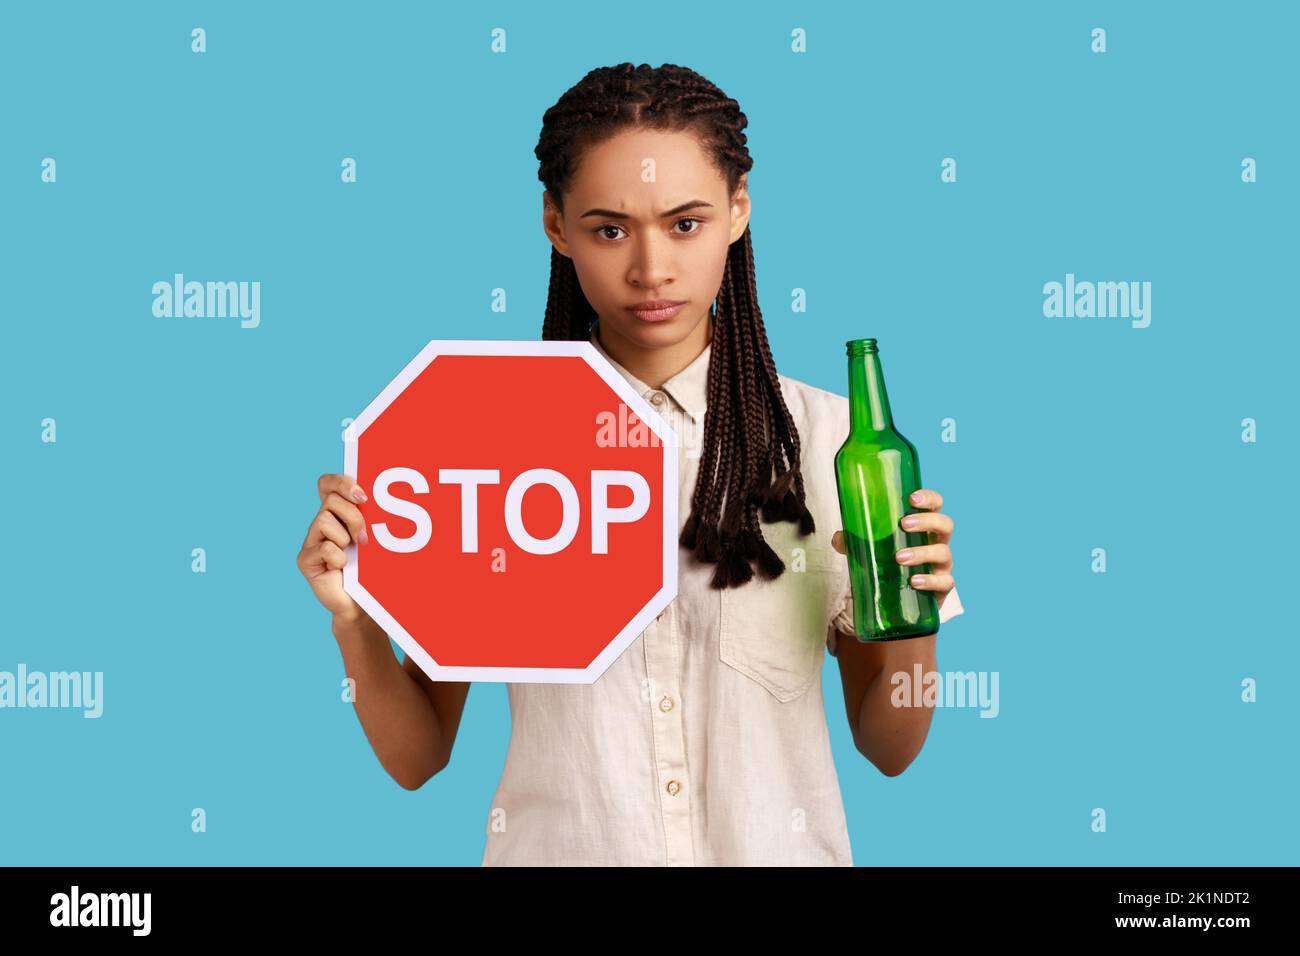 Portrait of serious woman with dreadlocks holding red stop sign and bottle with alcoholic beverage, calls on dont drink alcohol, wearing white shirt. Indoor studio shot isolated on blue background. Stock Photo